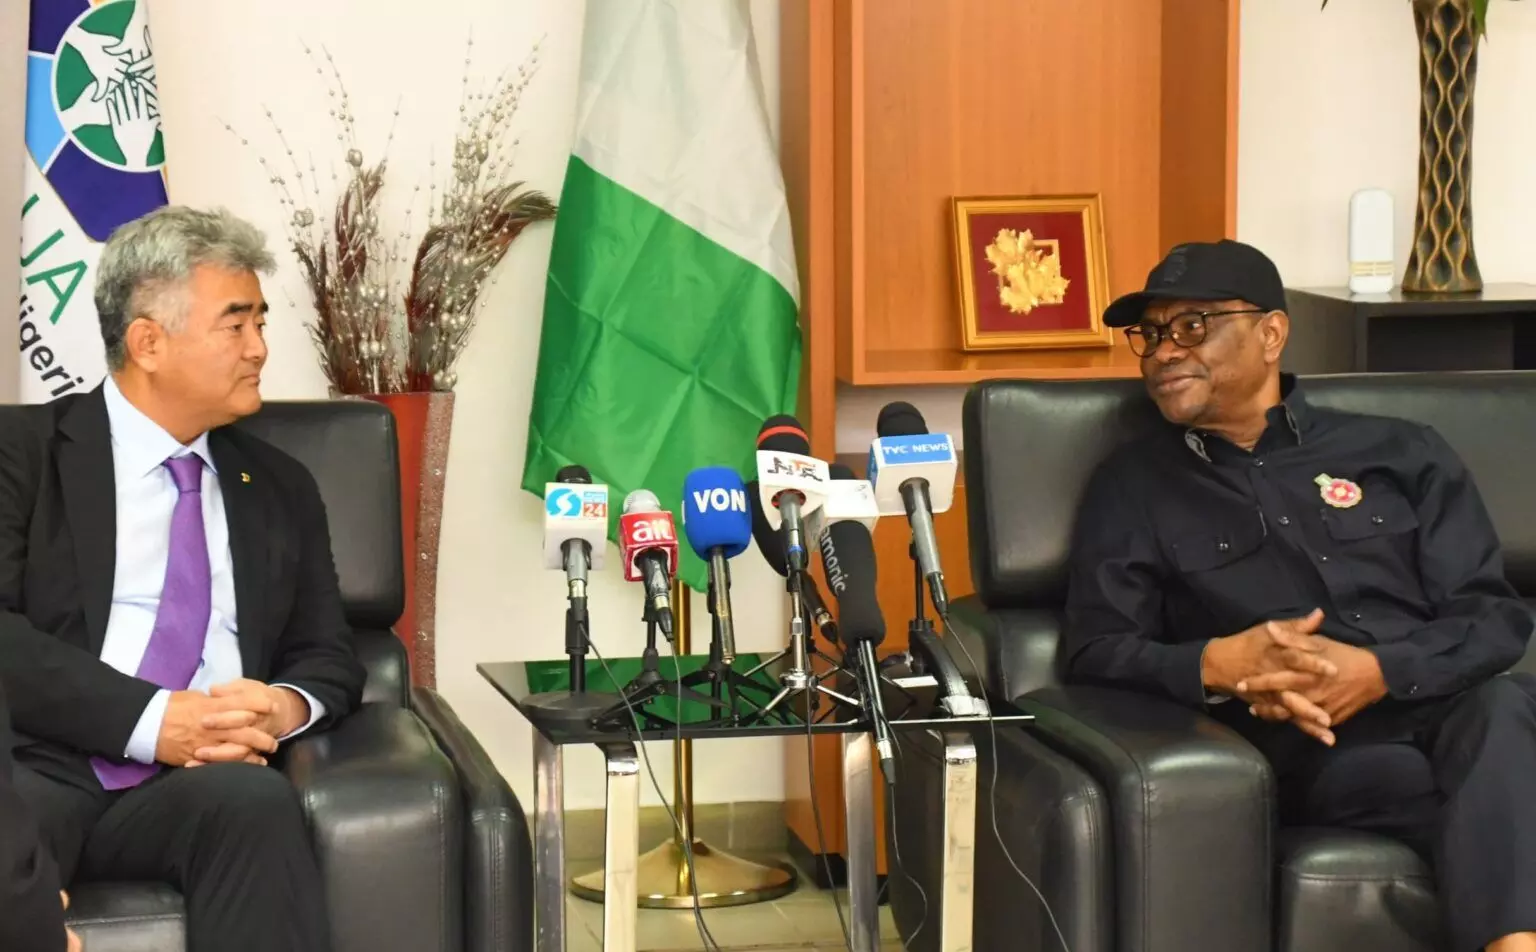 Wike seeks partnership with Daewoo on luxury hotels to promote tourism